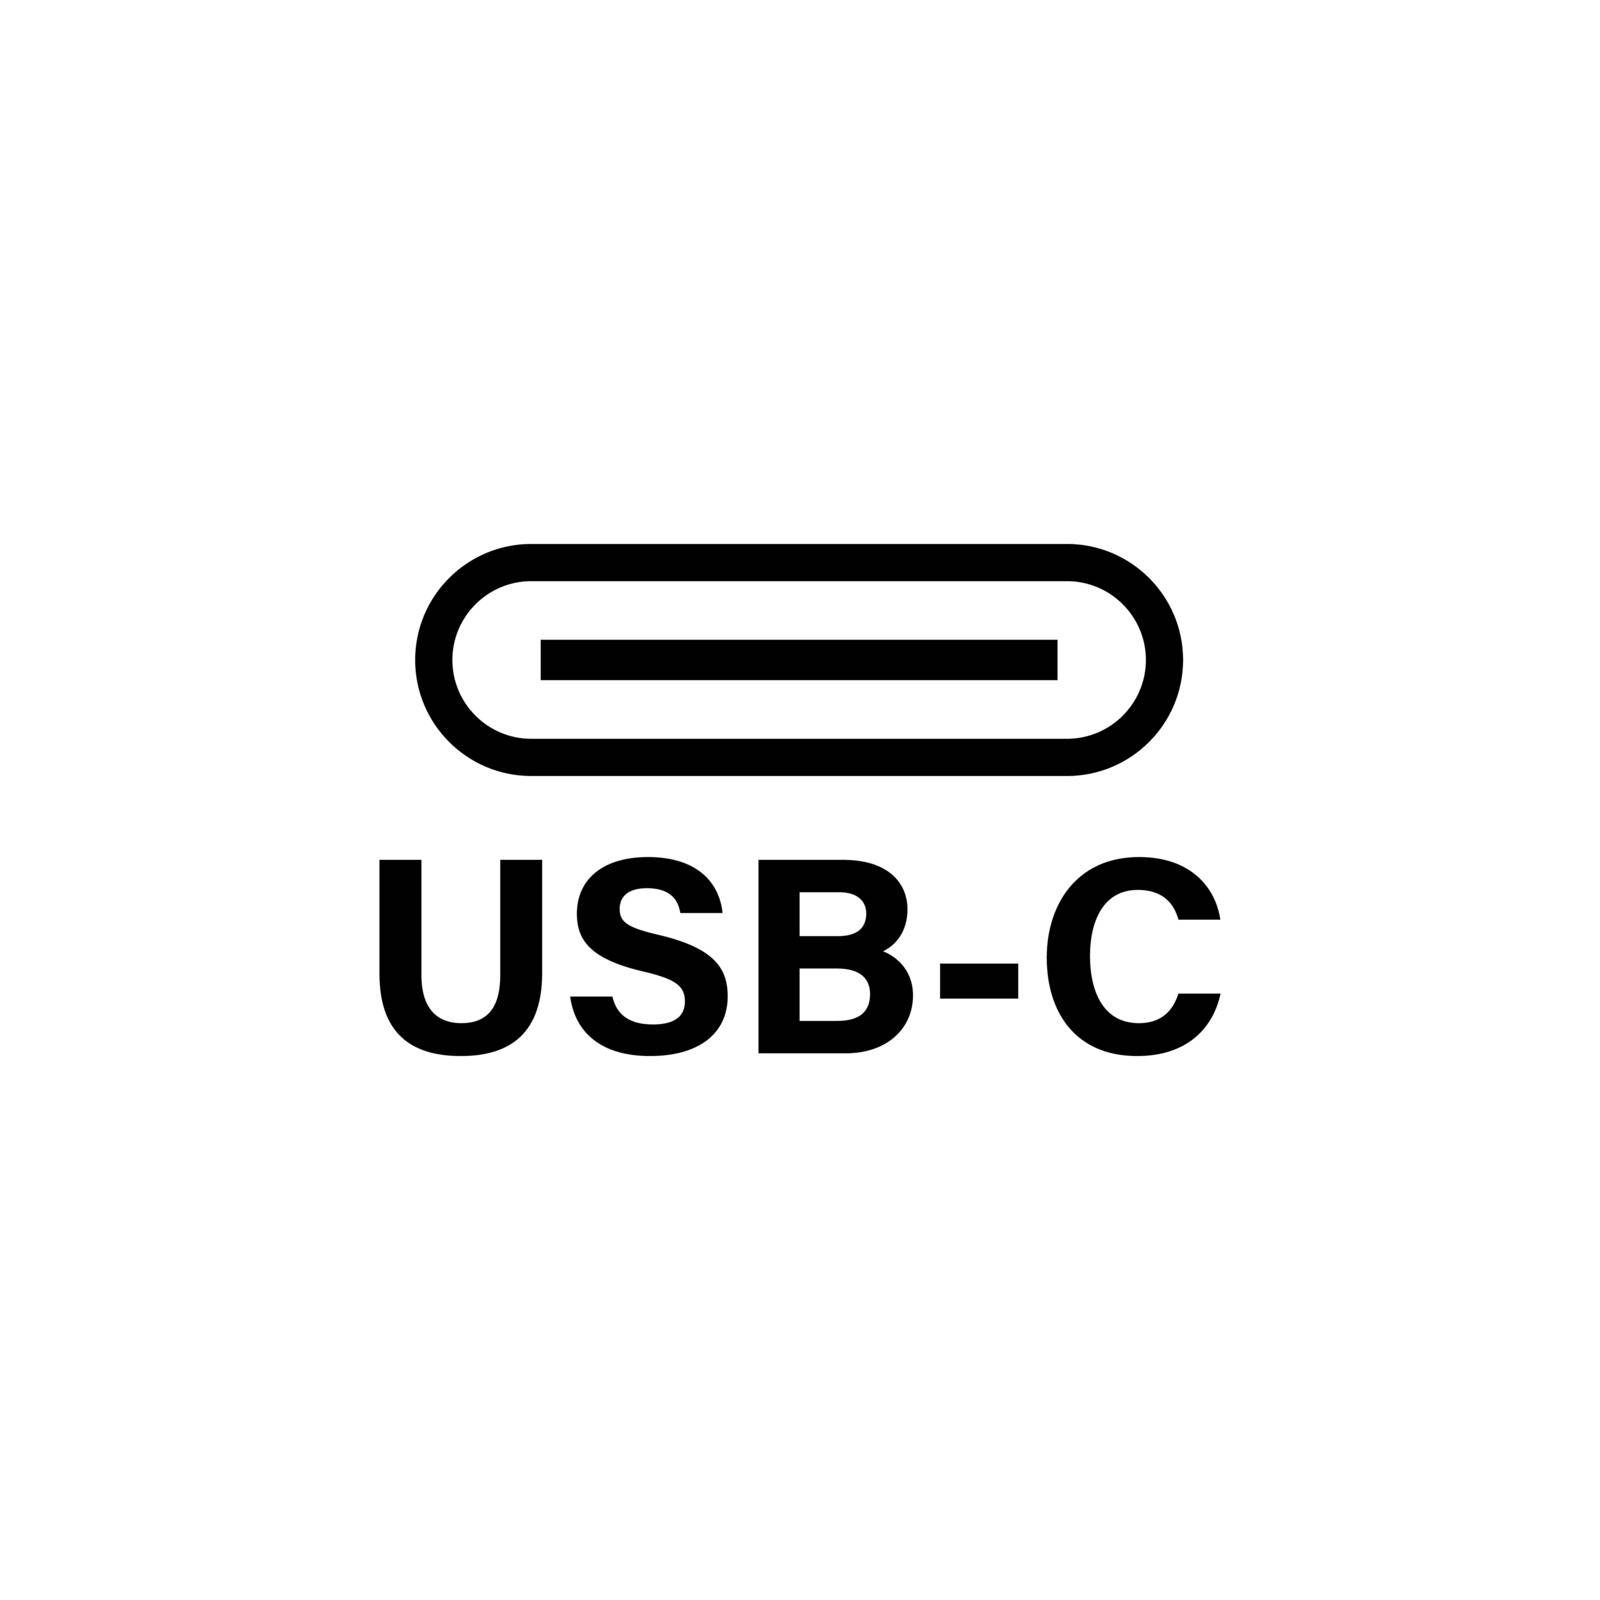 USB Type C or USB 4 connector cable icon vector. by windawake